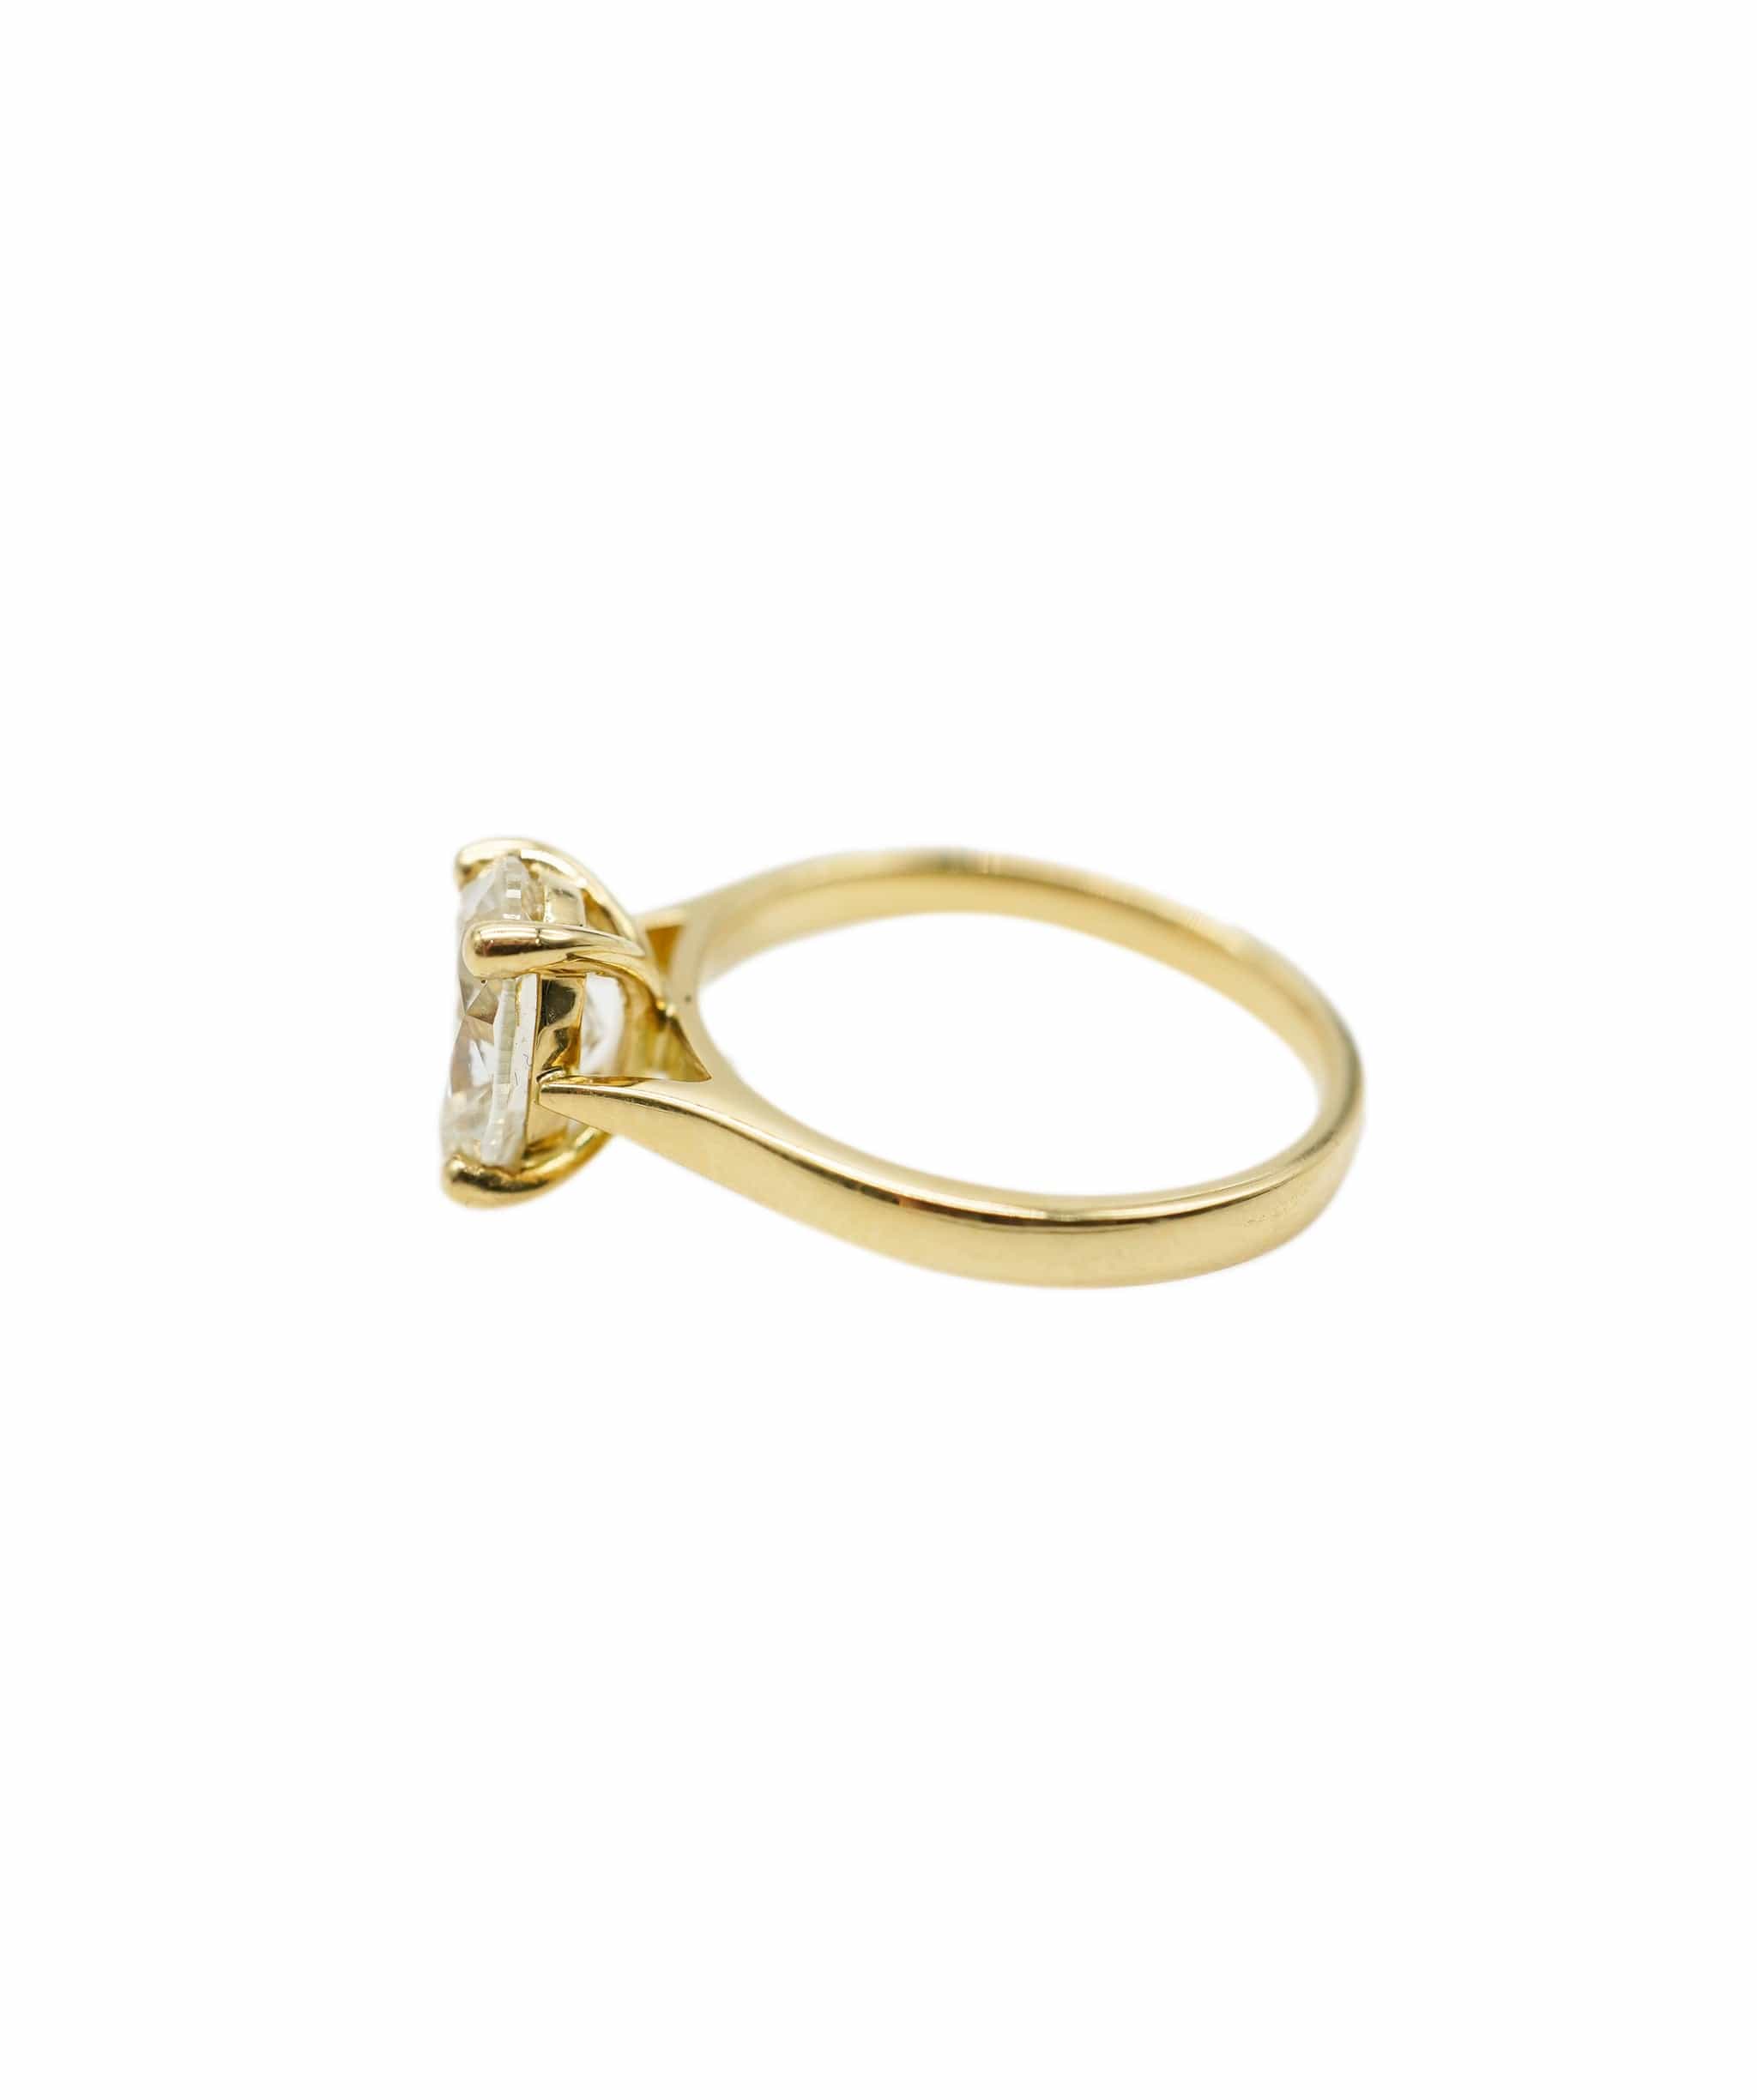 Luxury Promise Oval-shaped diamond, 1.70 carats, yellow gold ring AHC1802